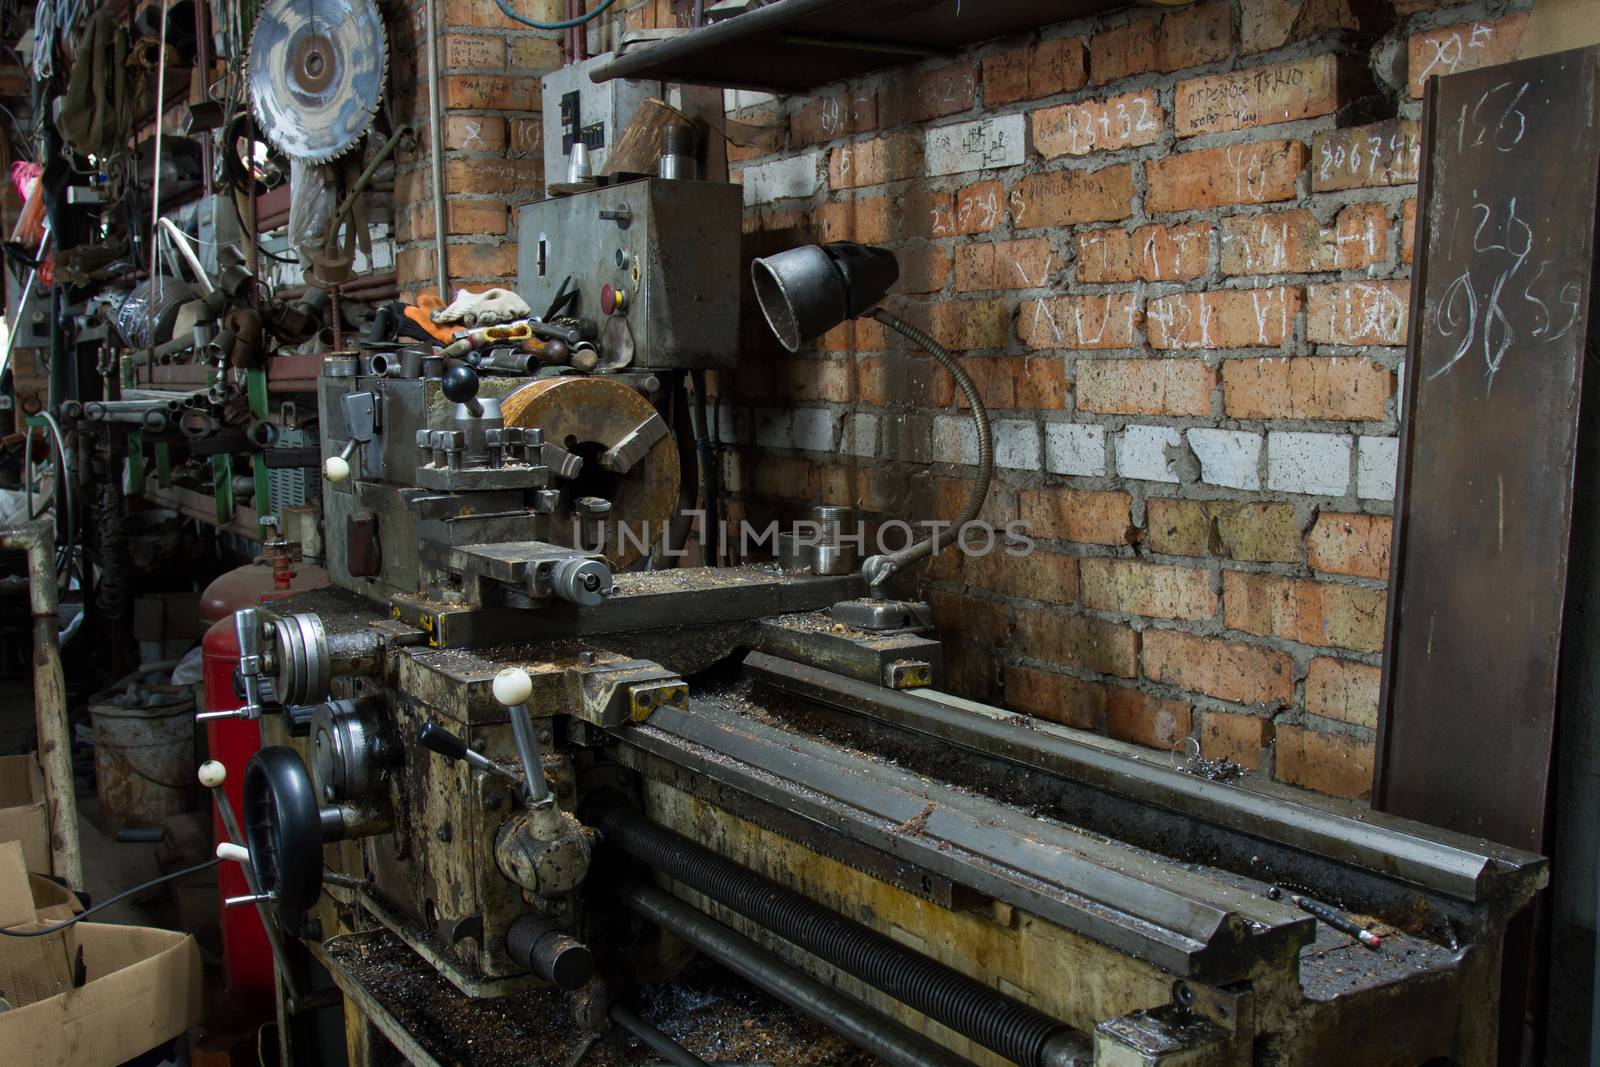 Electrical grinding machine bench grinder. Old and dirty drilling machine in factory. Foto